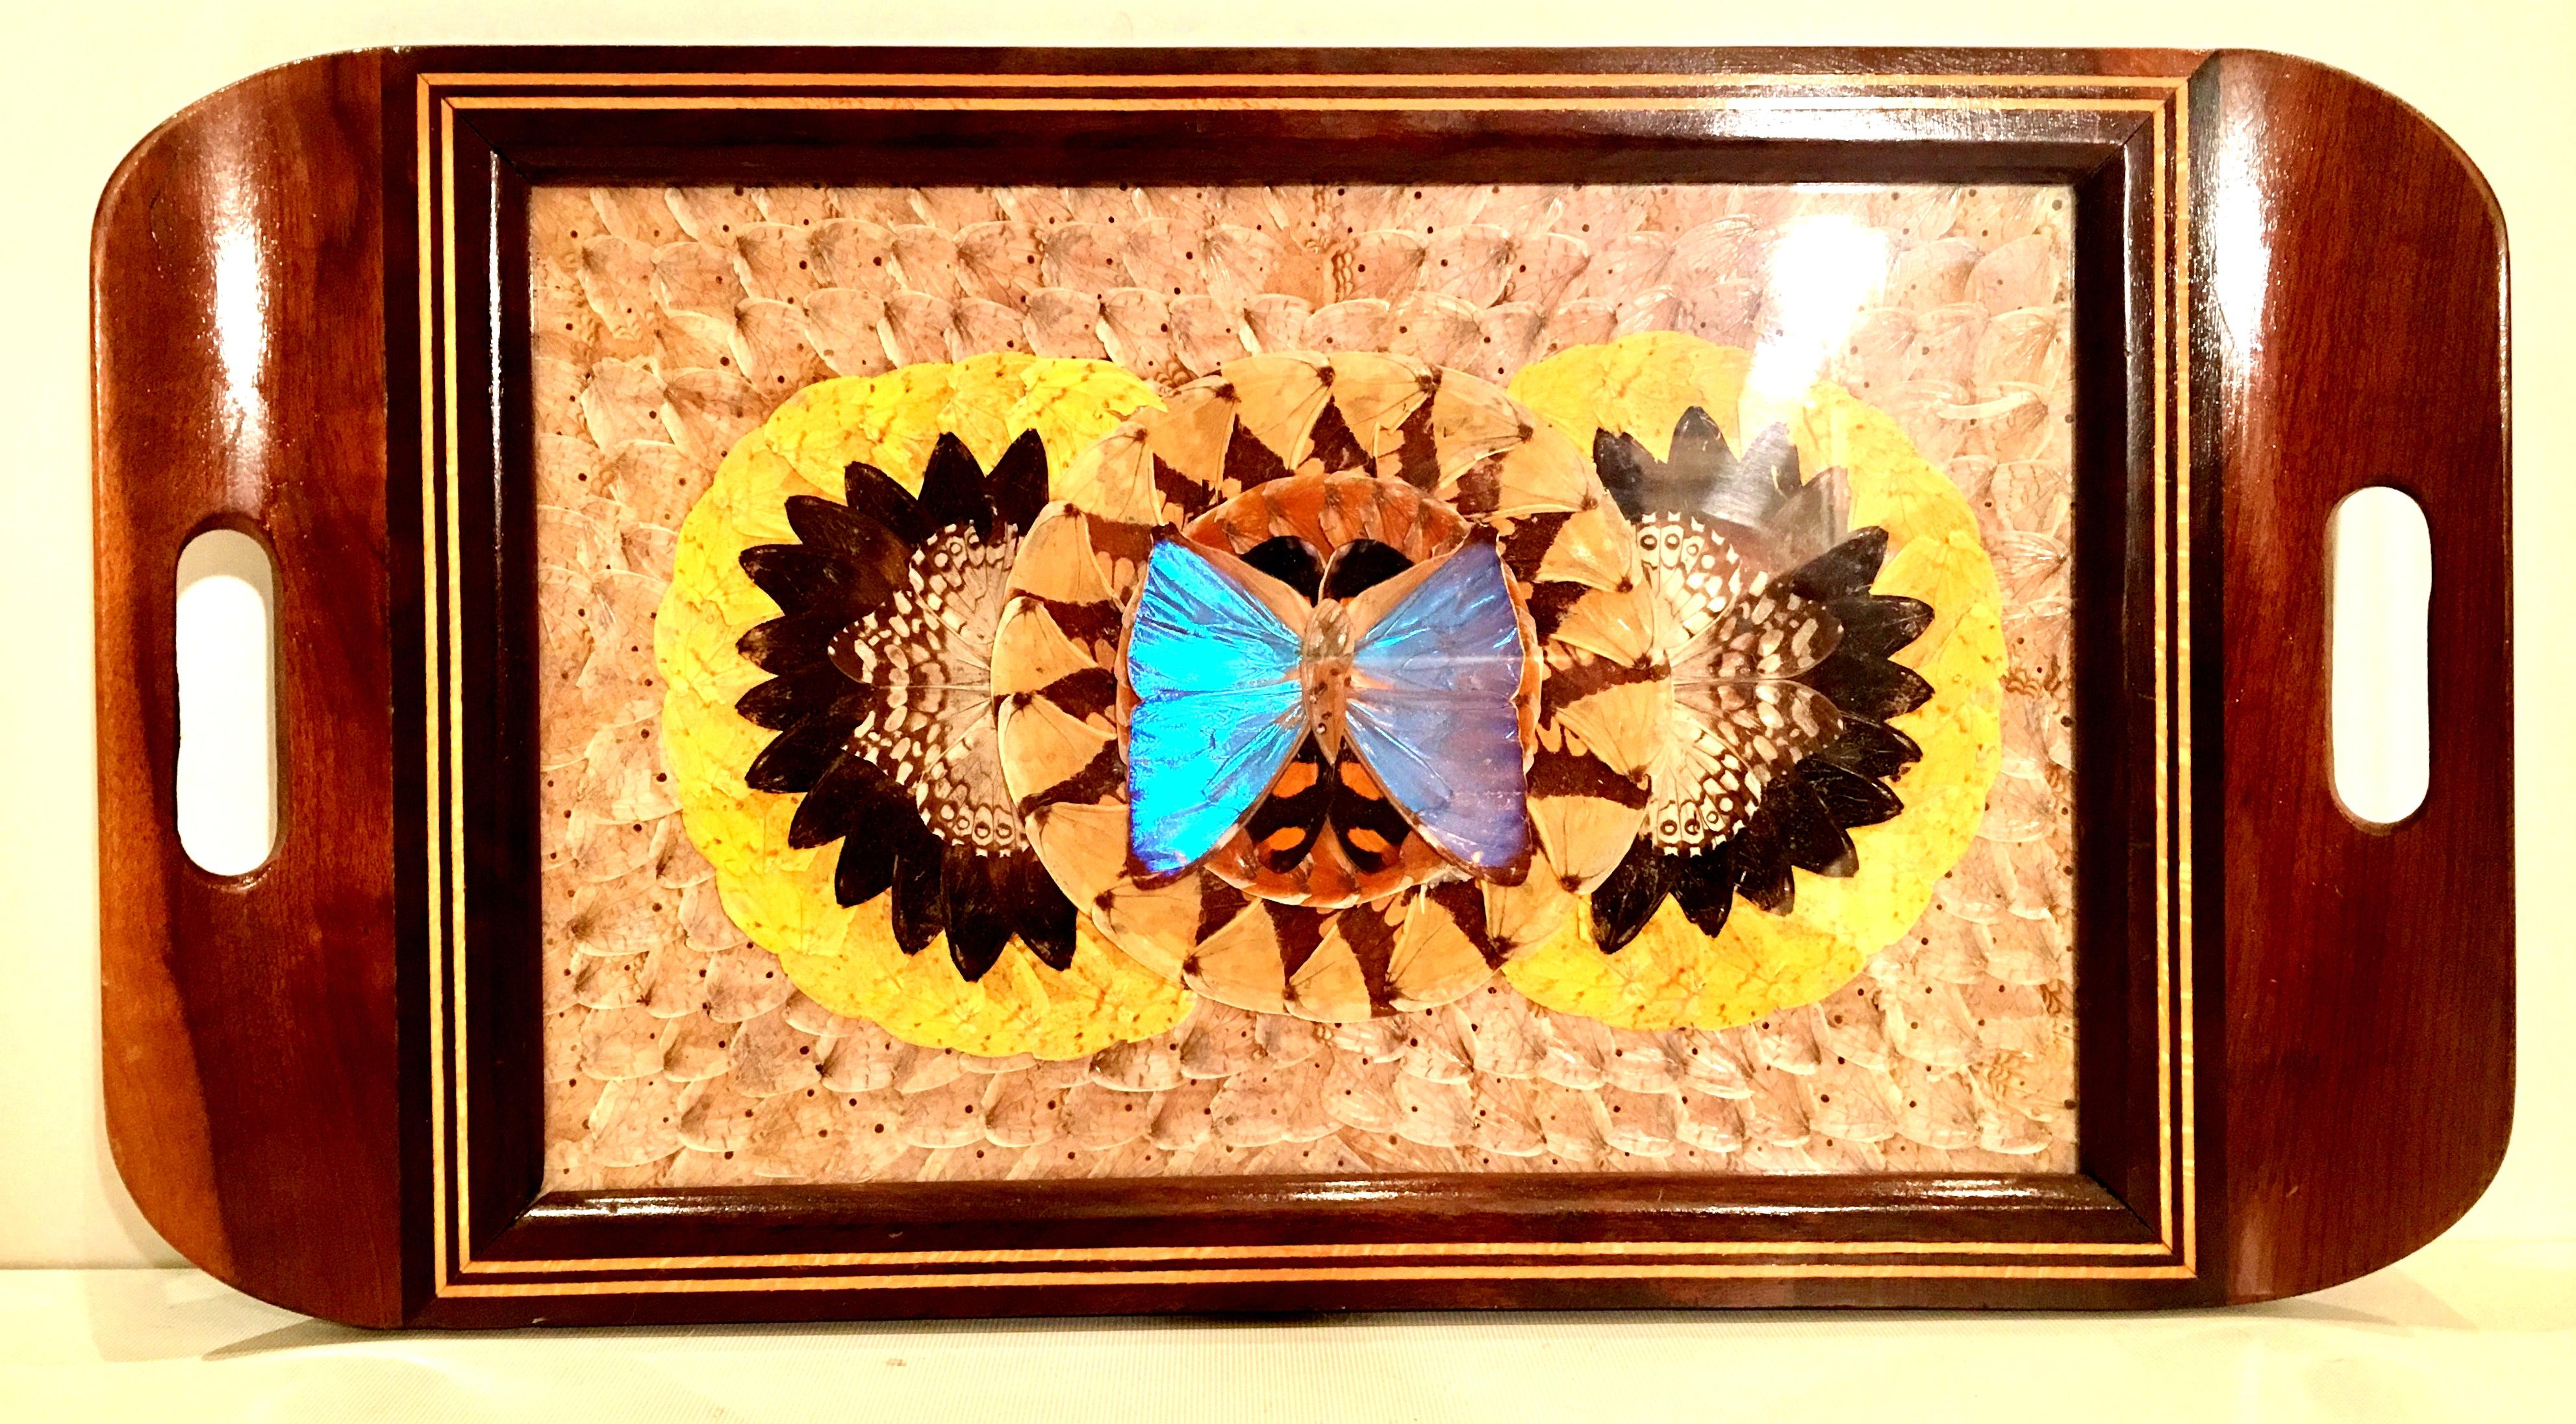 Mid 20th-Century Brazilian wood, brass inlay pressed neon blue butterfly under glass Brazilian wood cut-out handle tray. Tray features brass inlay detail and is in excellent vintage condition.